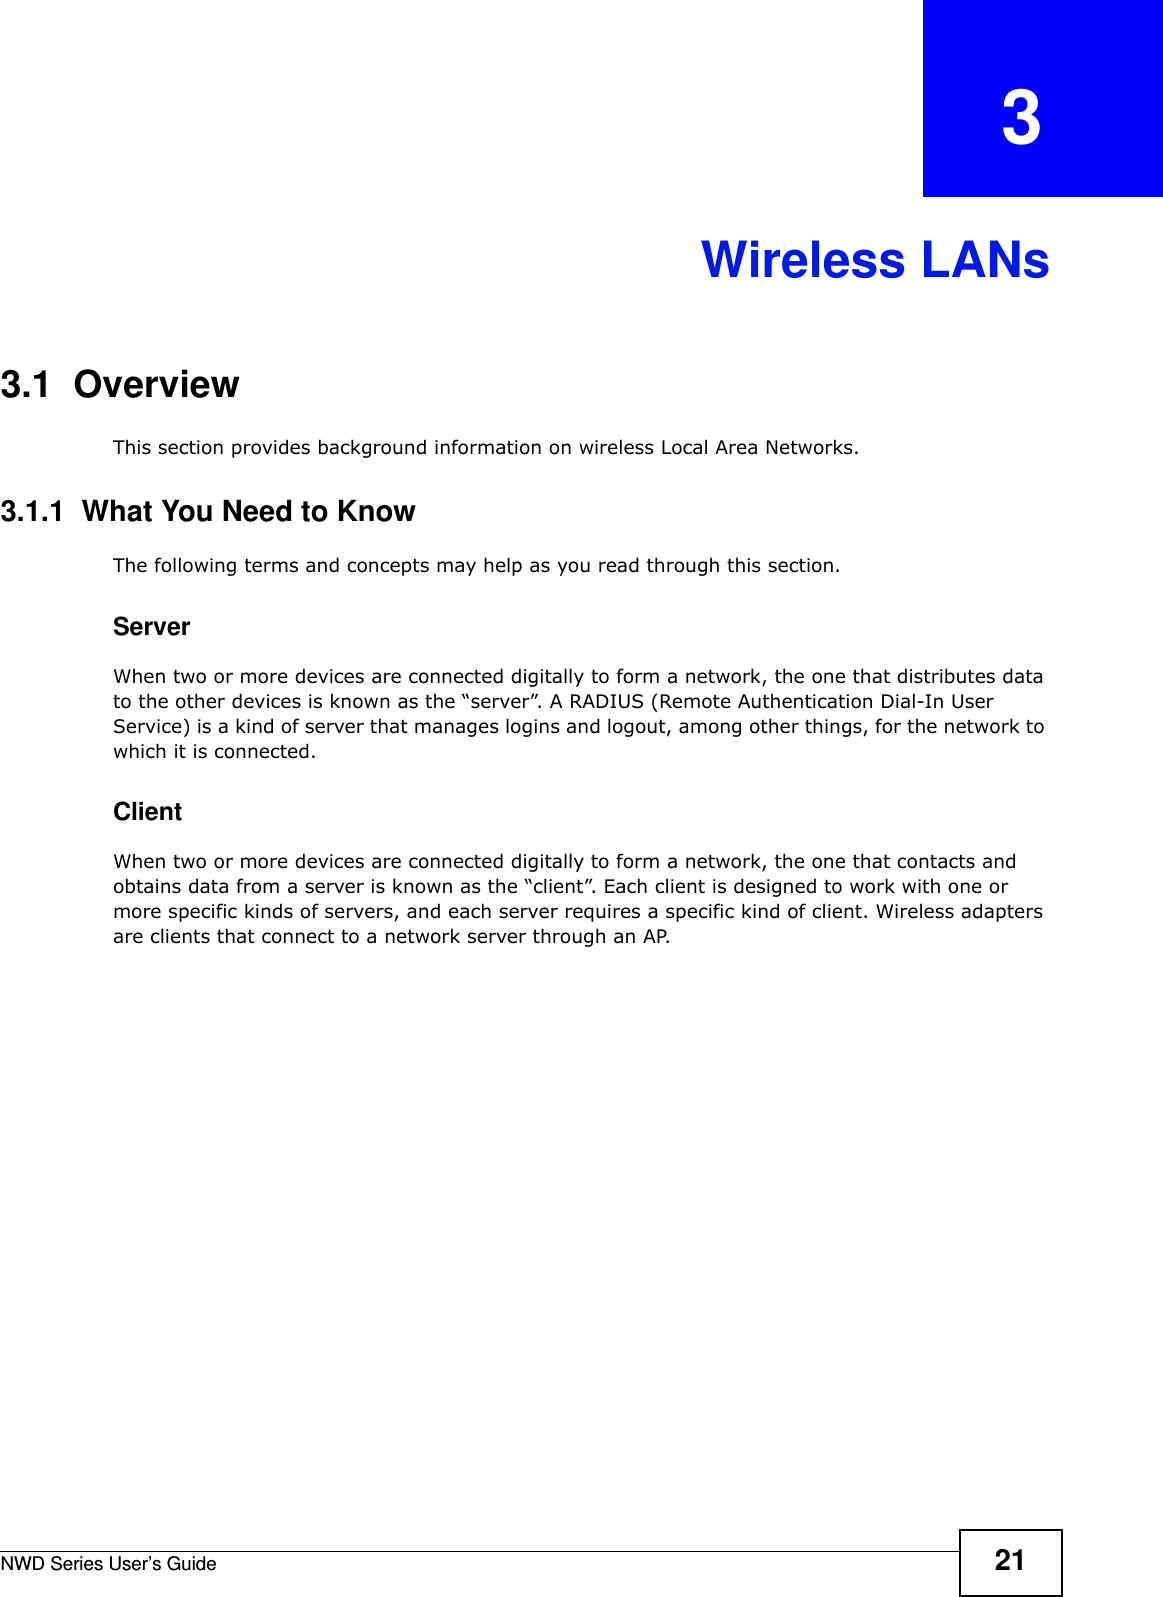 NWD Series User’s Guide 21CHAPTER   3Wireless LANs3.1  OverviewThis section provides background information on wireless Local Area Networks.3.1.1  What You Need to KnowThe following terms and concepts may help as you read through this section.ServerWhen two or more devices are connected digitally to form a network, the one that distributes data to the other devices is known as the “server”. A RADIUS (Remote Authentication Dial-In User Service) is a kind of server that manages logins and logout, among other things, for the network to which it is connected.ClientWhen two or more devices are connected digitally to form a network, the one that contacts and obtains data from a server is known as the “client”. Each client is designed to work with one or more specific kinds of servers, and each server requires a specific kind of client. Wireless adapters are clients that connect to a network server through an AP.